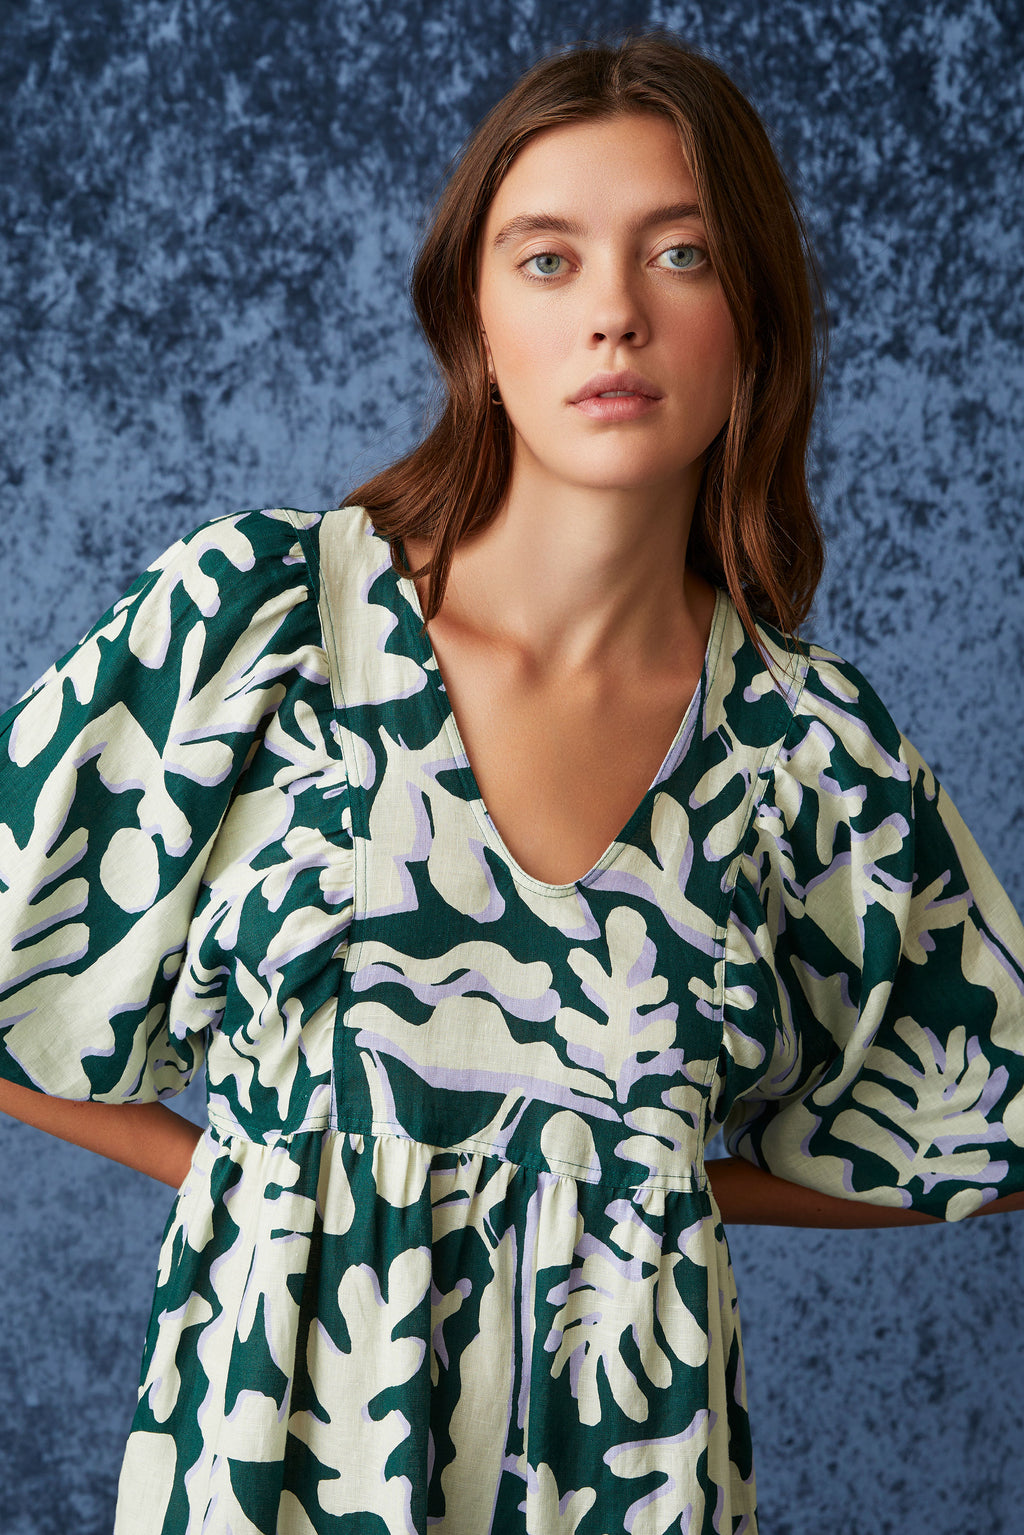 Midi dress with a v-neckline and short bubble sleeves in a dark and light green geometric floral print